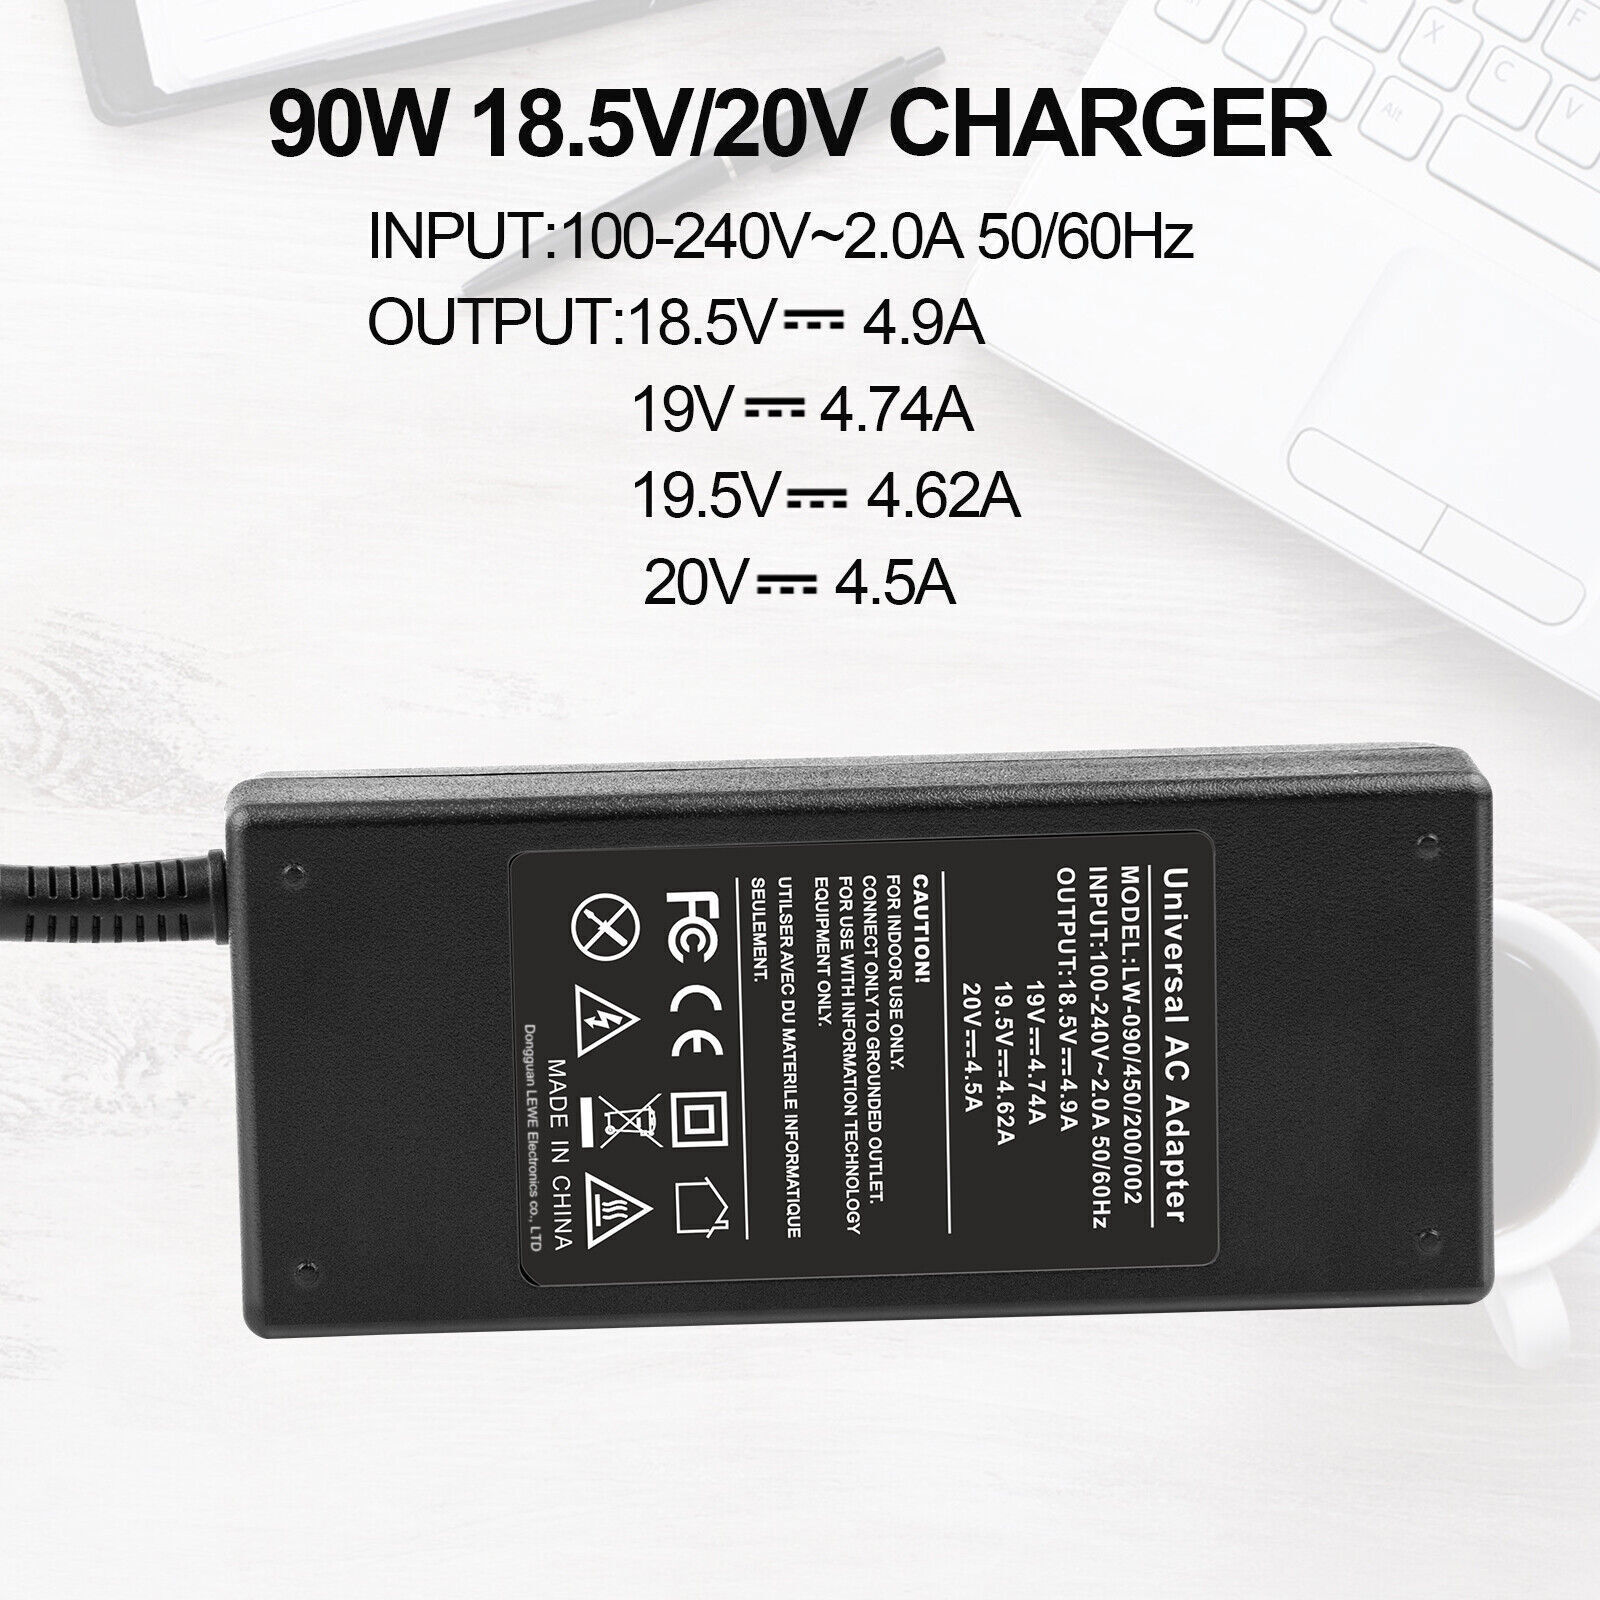 90W Universal Ac Laptop Charger Power Adapter for Hp Compaq Lenovo IBM Dell Acer